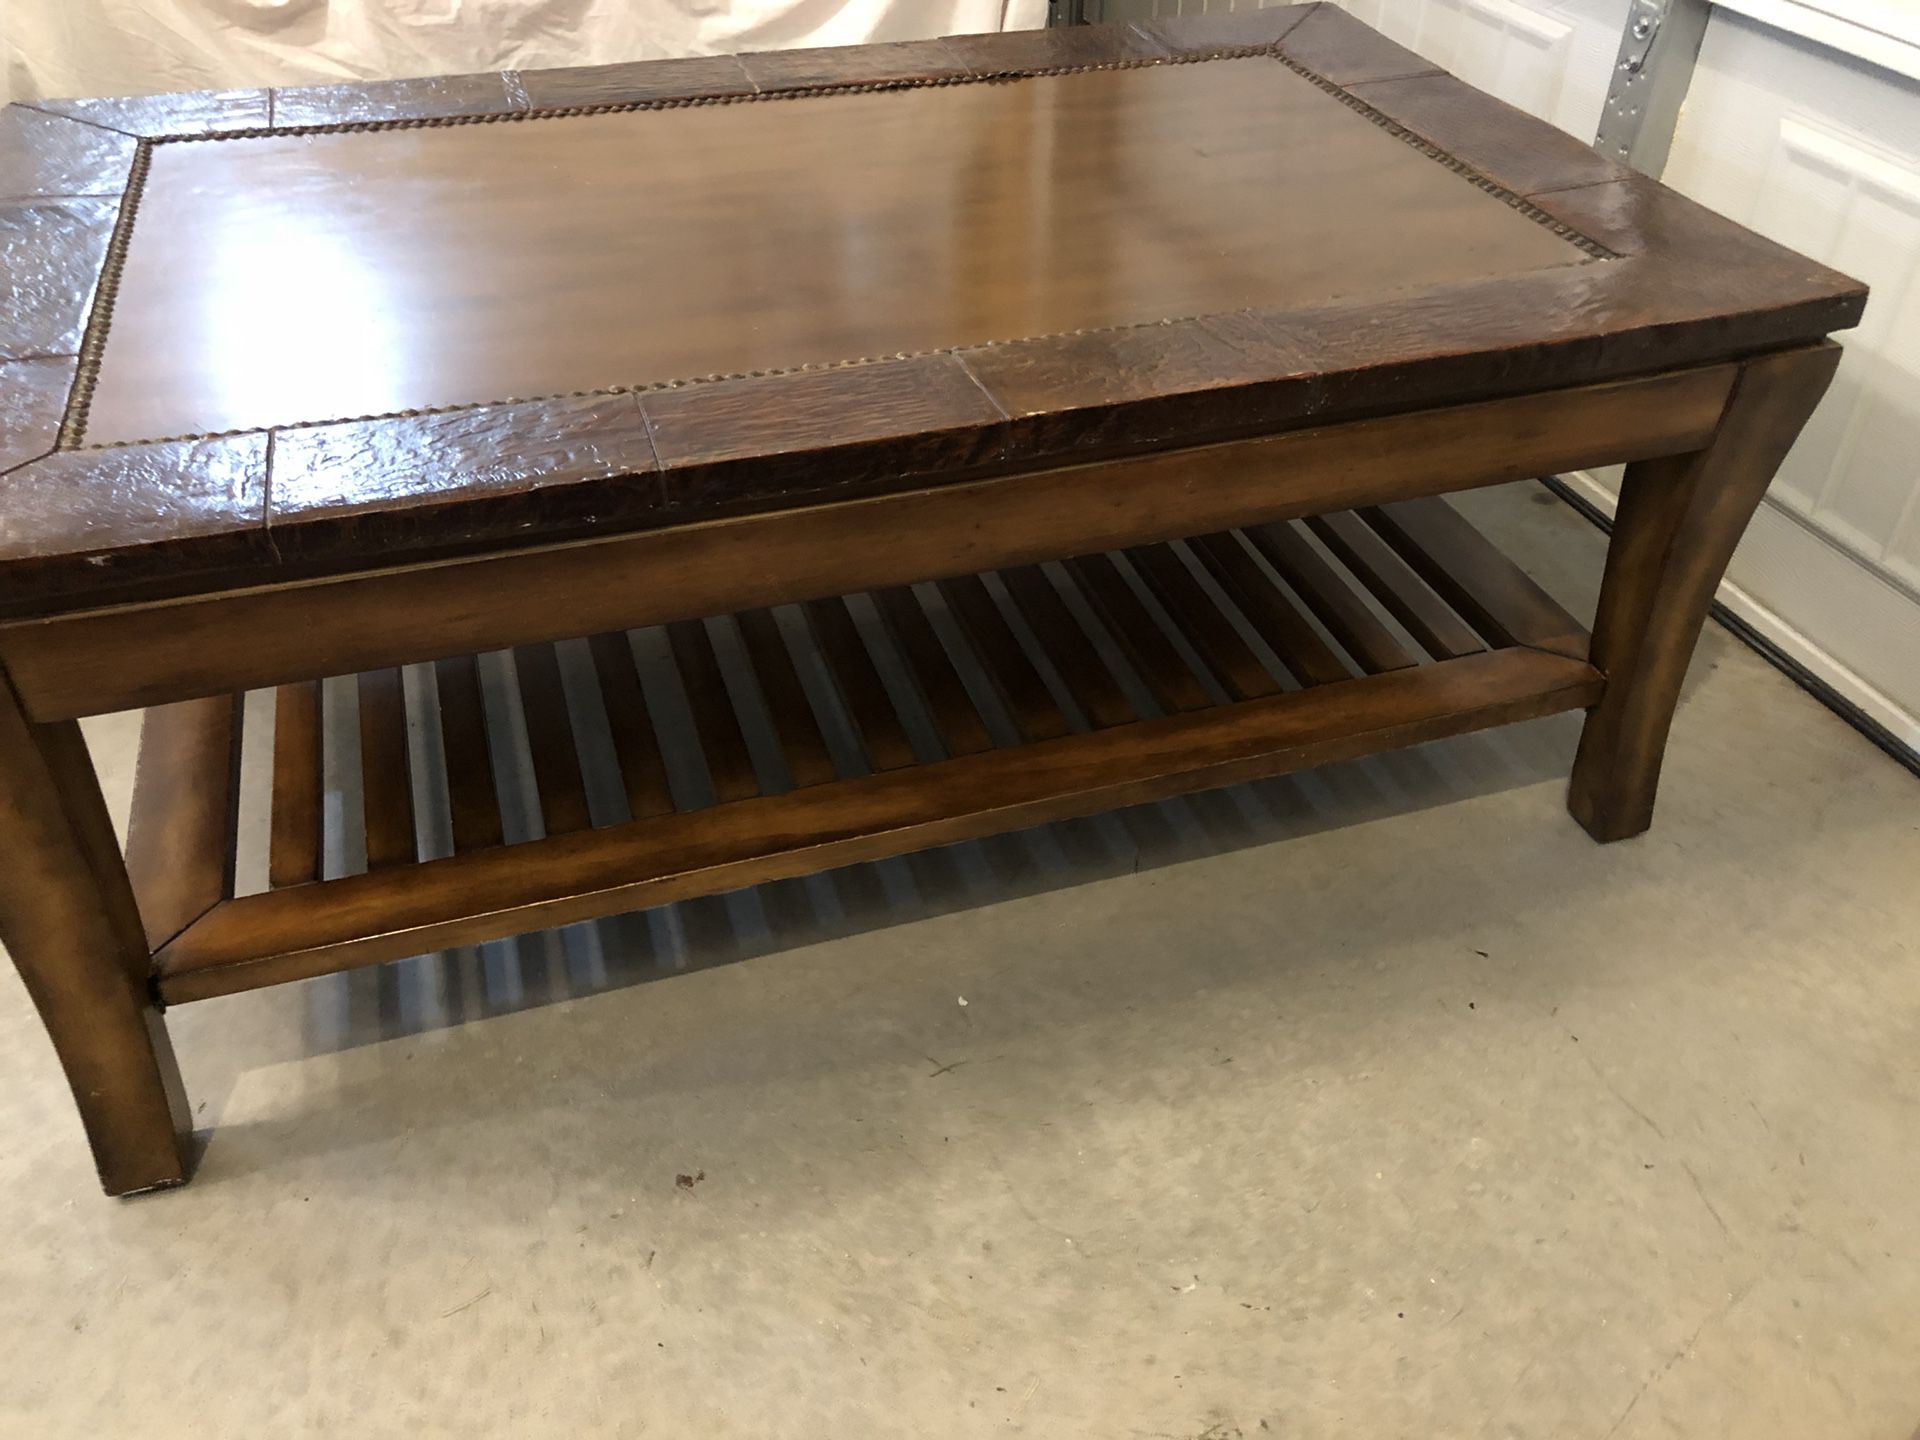 Large Copper-Toned Coffee Table with Brown Border Accents